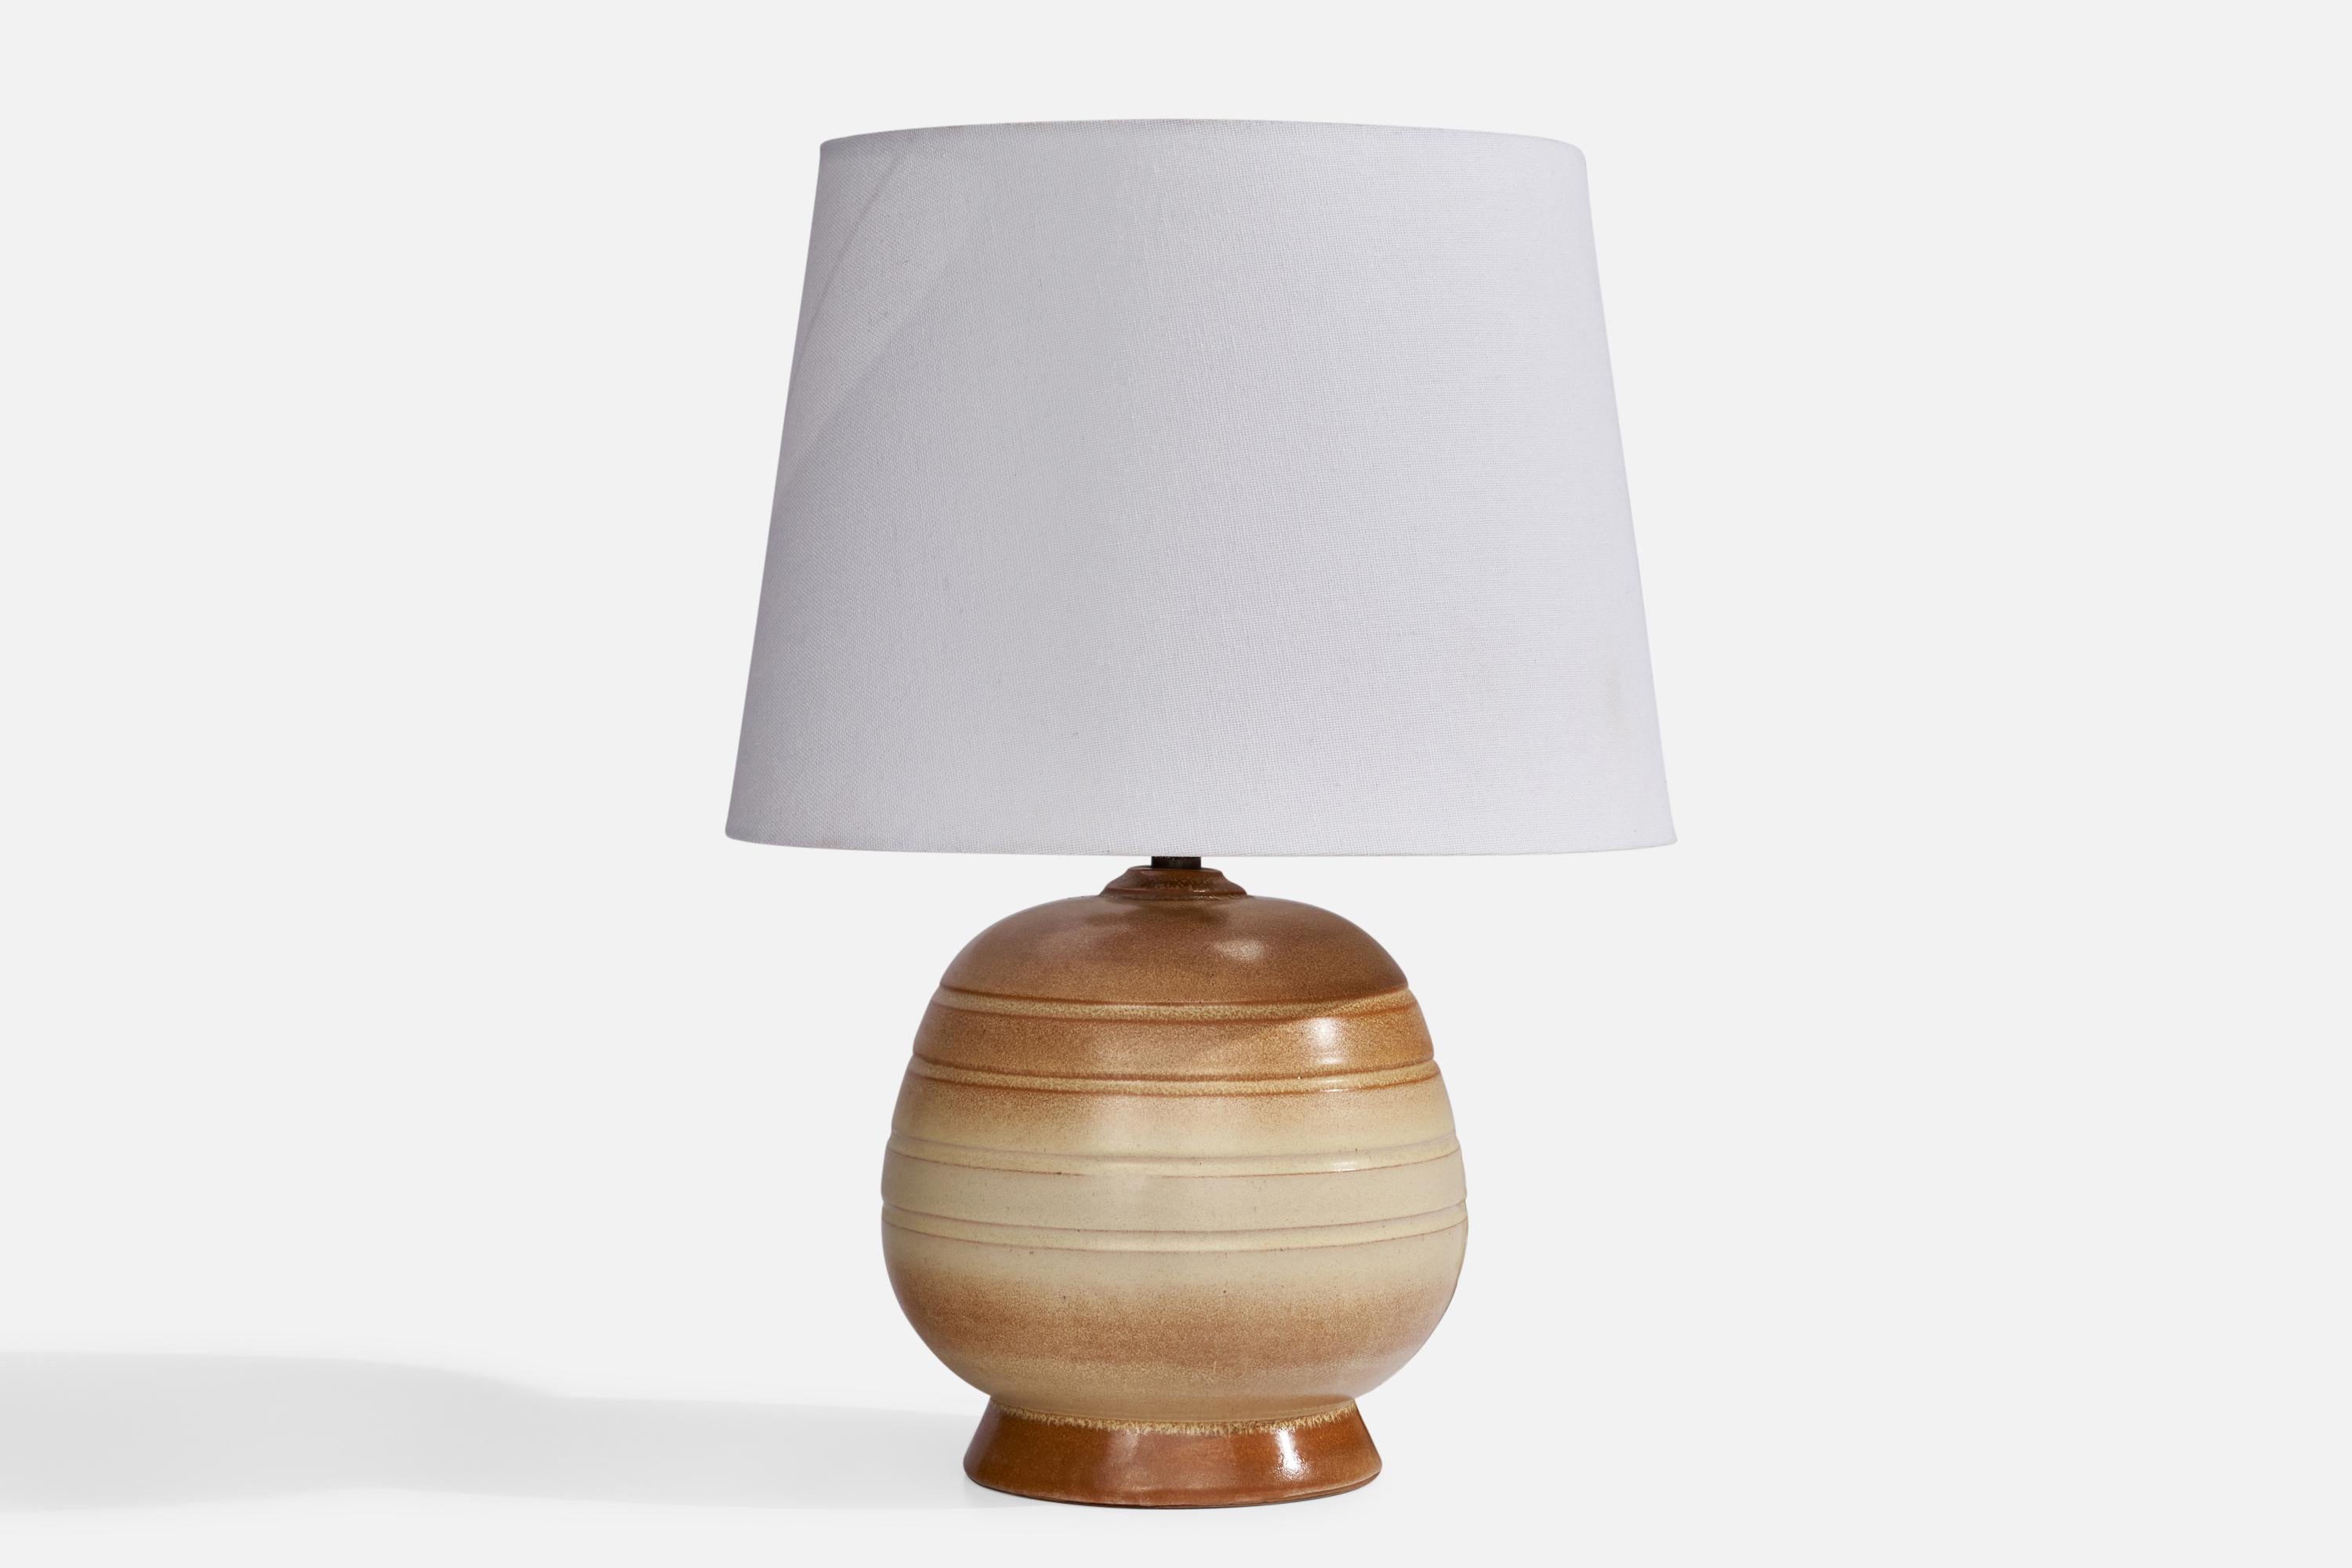 A brown and beige-glazed ceramic table lamp designed and produced in Sweden, c. 1940s.

Dimensions of Lamp (inches): 9” H x 6” Diameter
Dimensions of Shade (inches): 8” Top Diameter x 10” Bottom Diameter x 7.25” H
Dimensions of Lamp with Shade